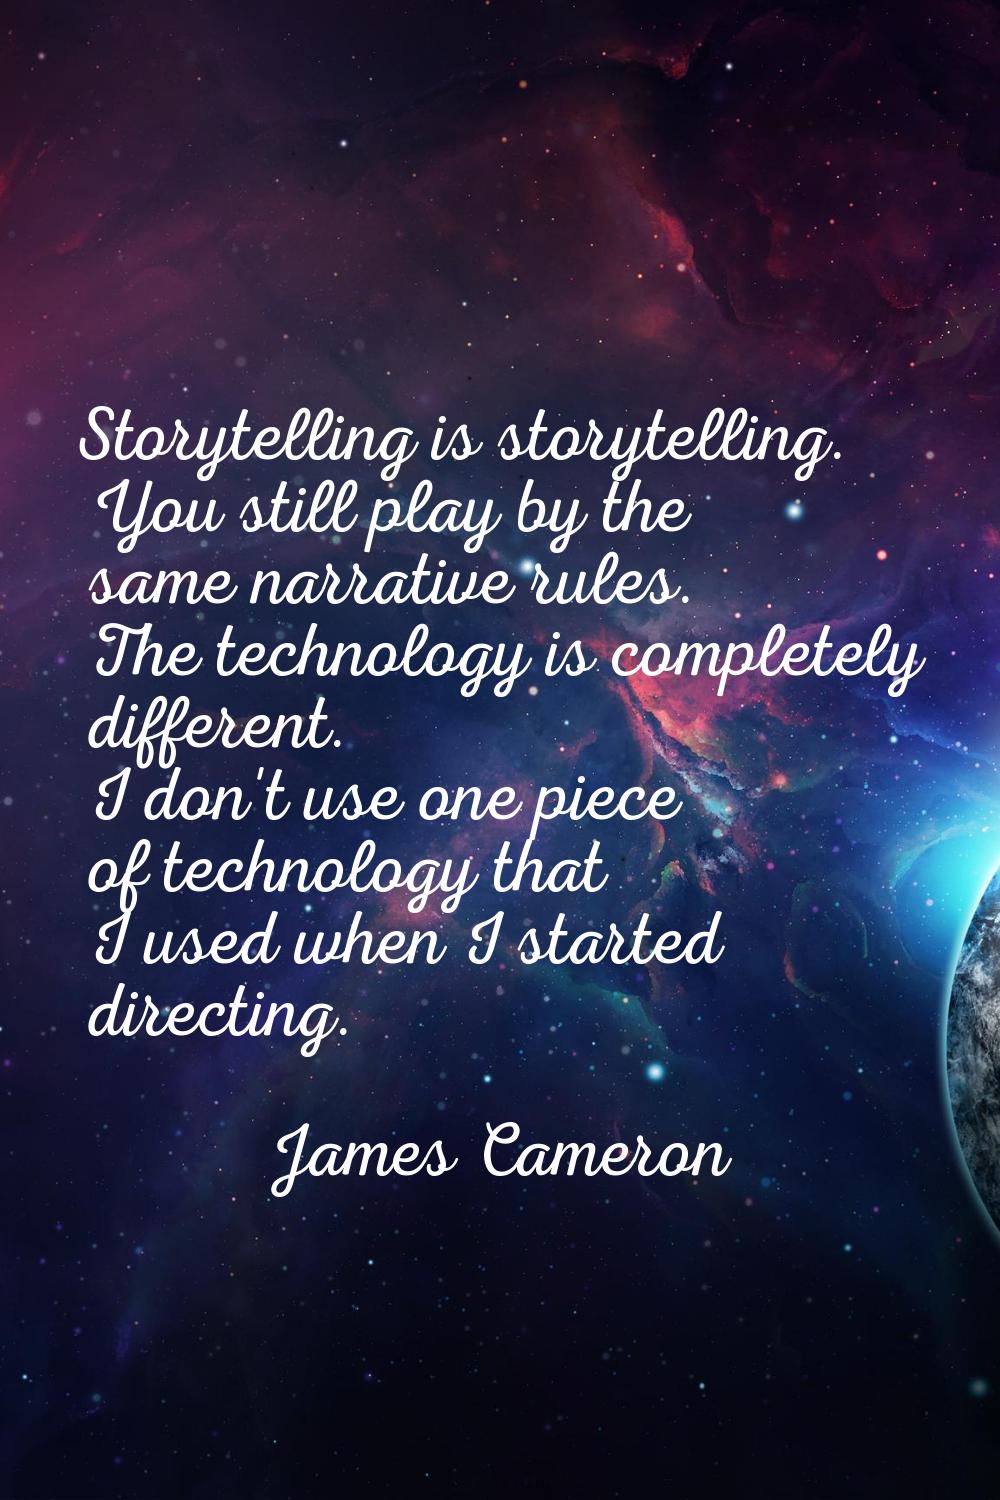 Storytelling is storytelling. You still play by the same narrative rules. The technology is complet